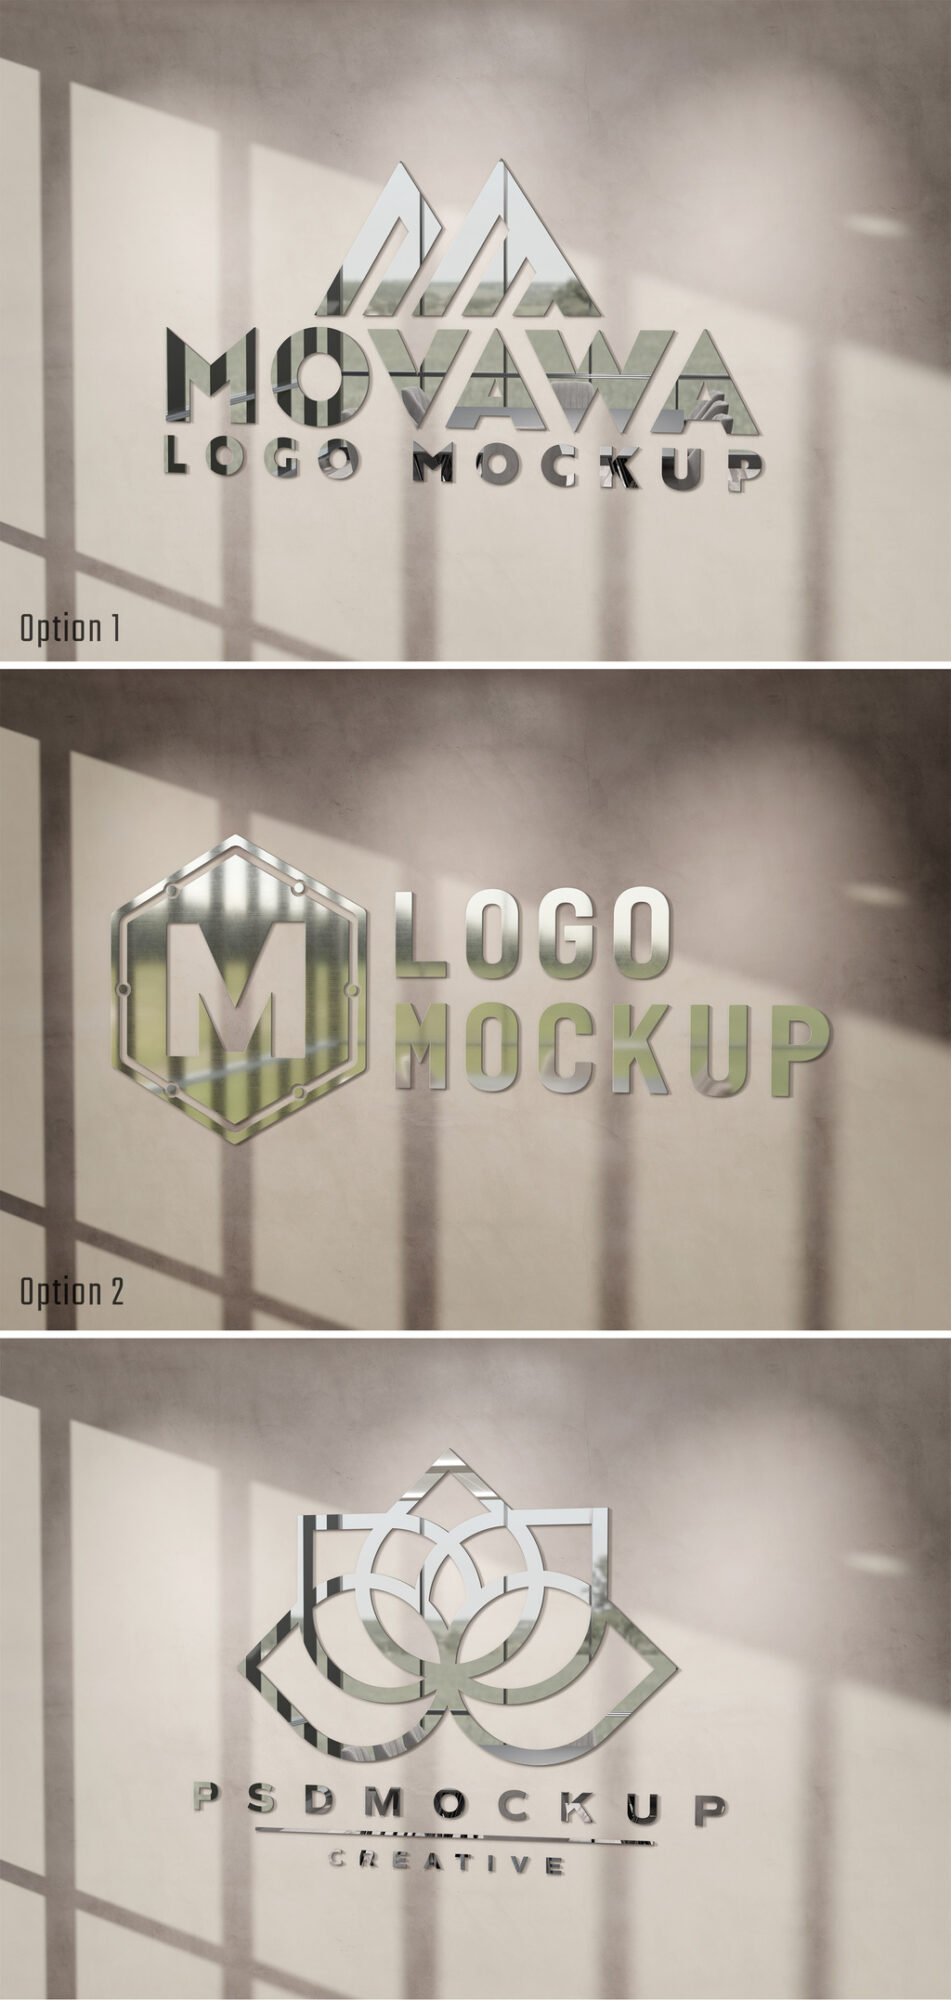 Logo Mockup with 3D Glossy Effect on Sunlit Wall 470949011